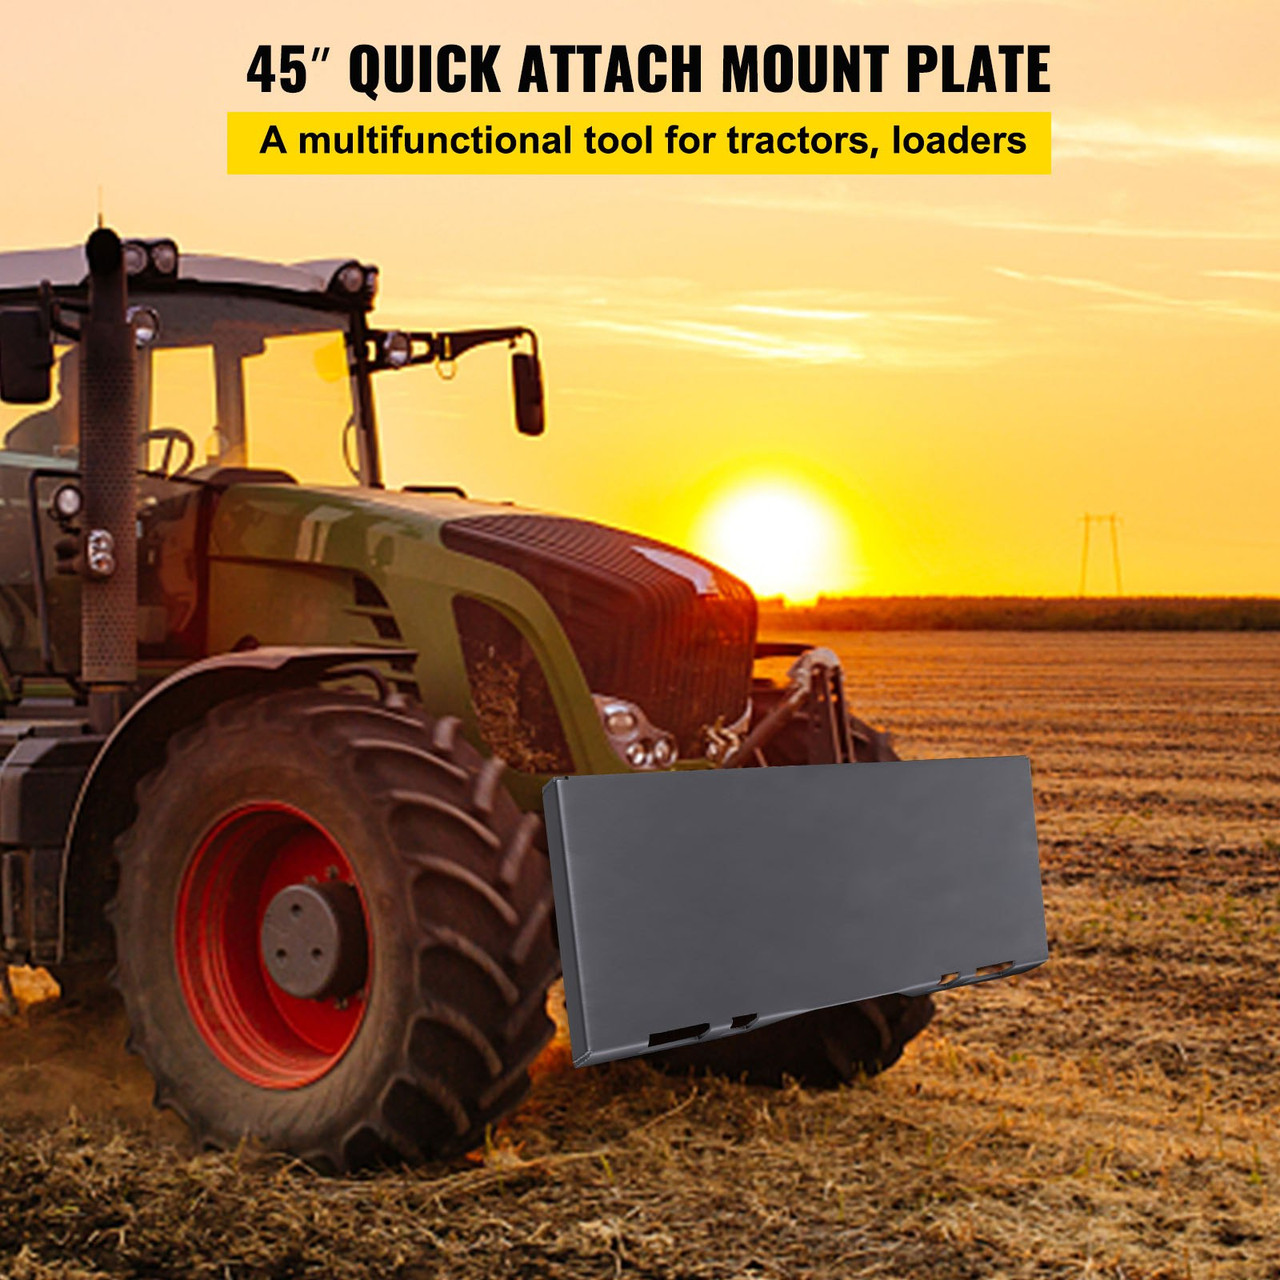 Skid Steer Mount Plate Thick Skid Steer Attachment Plate Steel Quick Attachment Loader Plate with 3 Additional Welding Rods Easy to Weld or Bolt to Different Accessories (5/16")